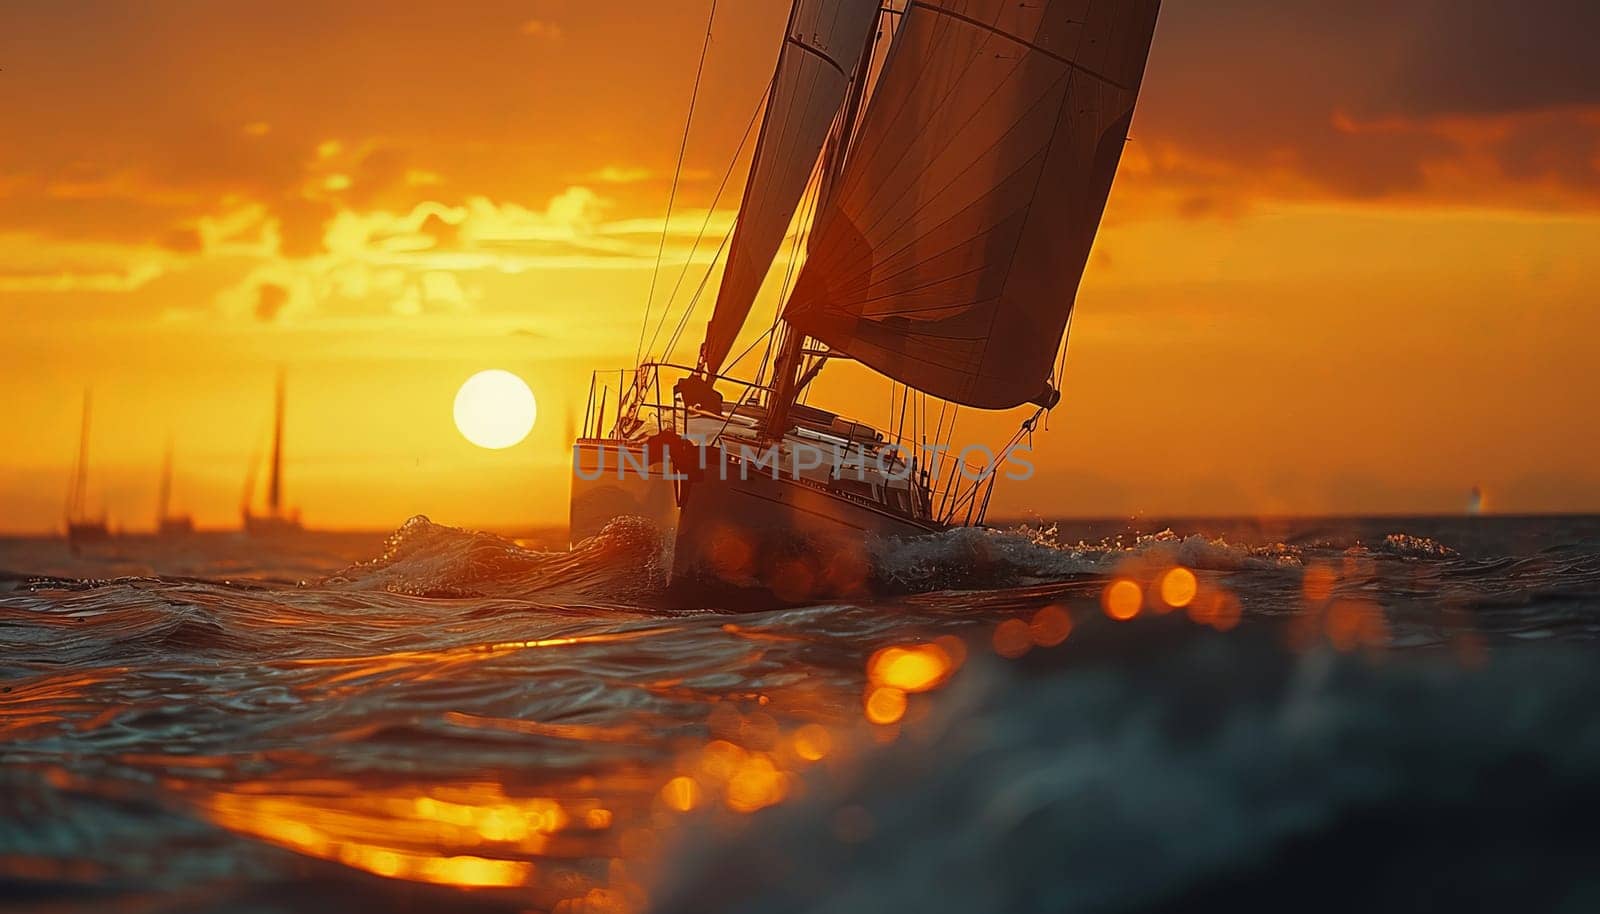 A sailboat is sailing in the ocean with the sun setting in the background by nateemee